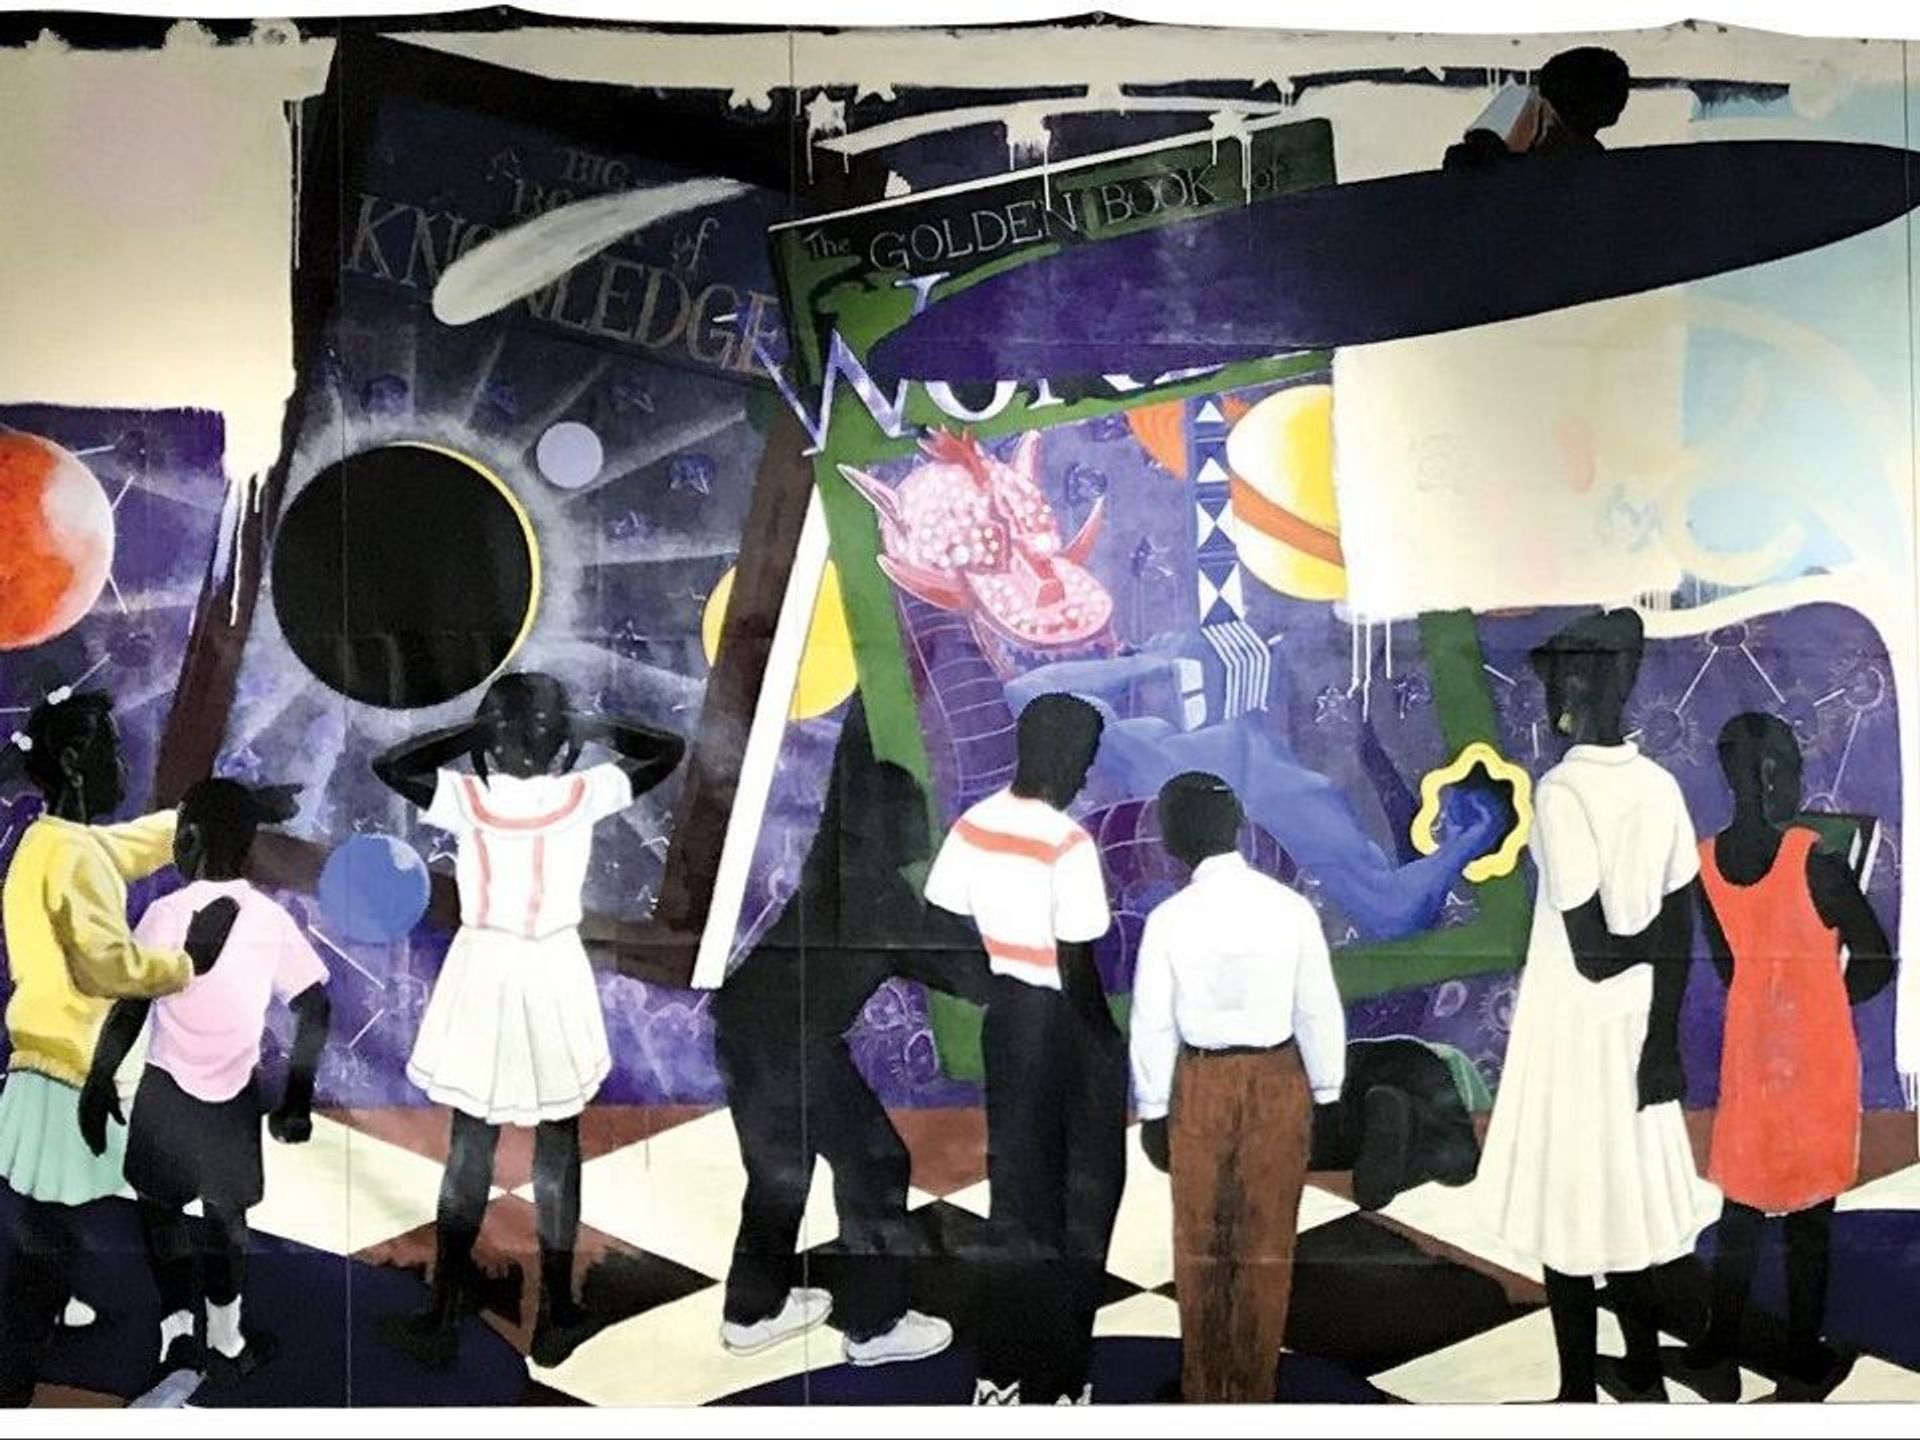 Kerry James Marshall, Knowledge and Wonder (1995) City of Chicago